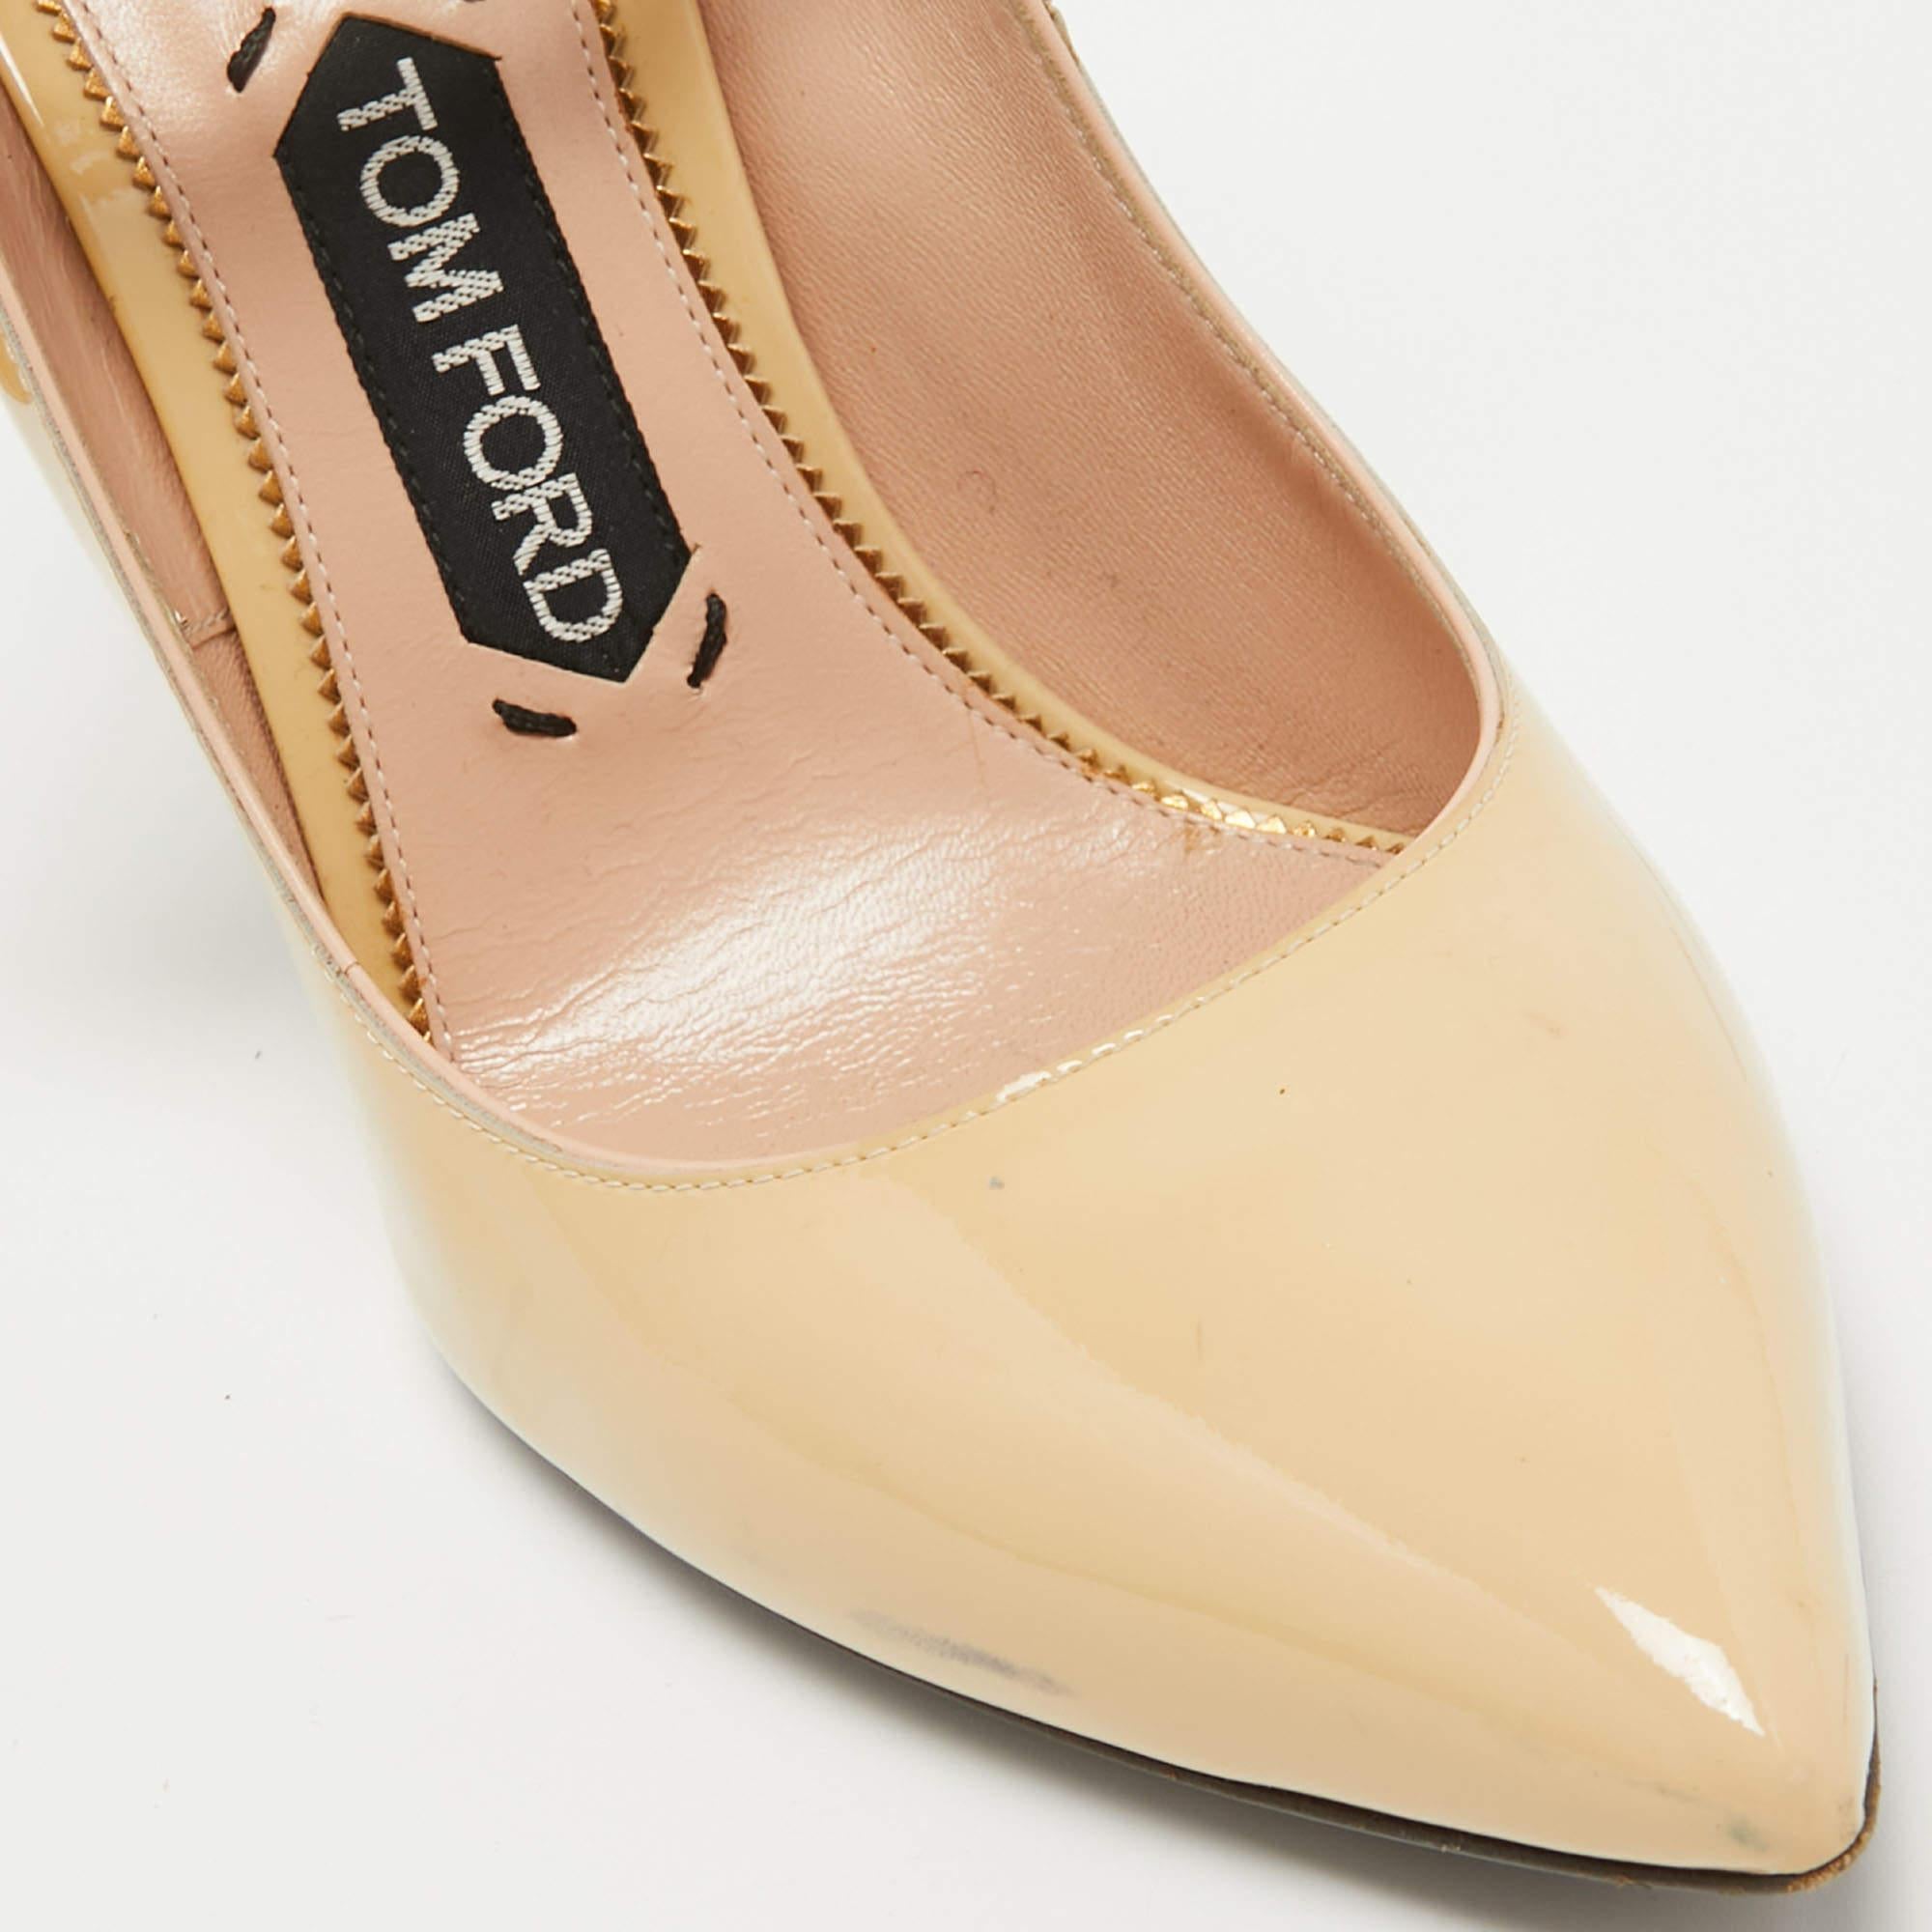 Tom Ford Beige Patent Leather Padlock Pumps Size 38.5 In Good Condition For Sale In Dubai, Al Qouz 2